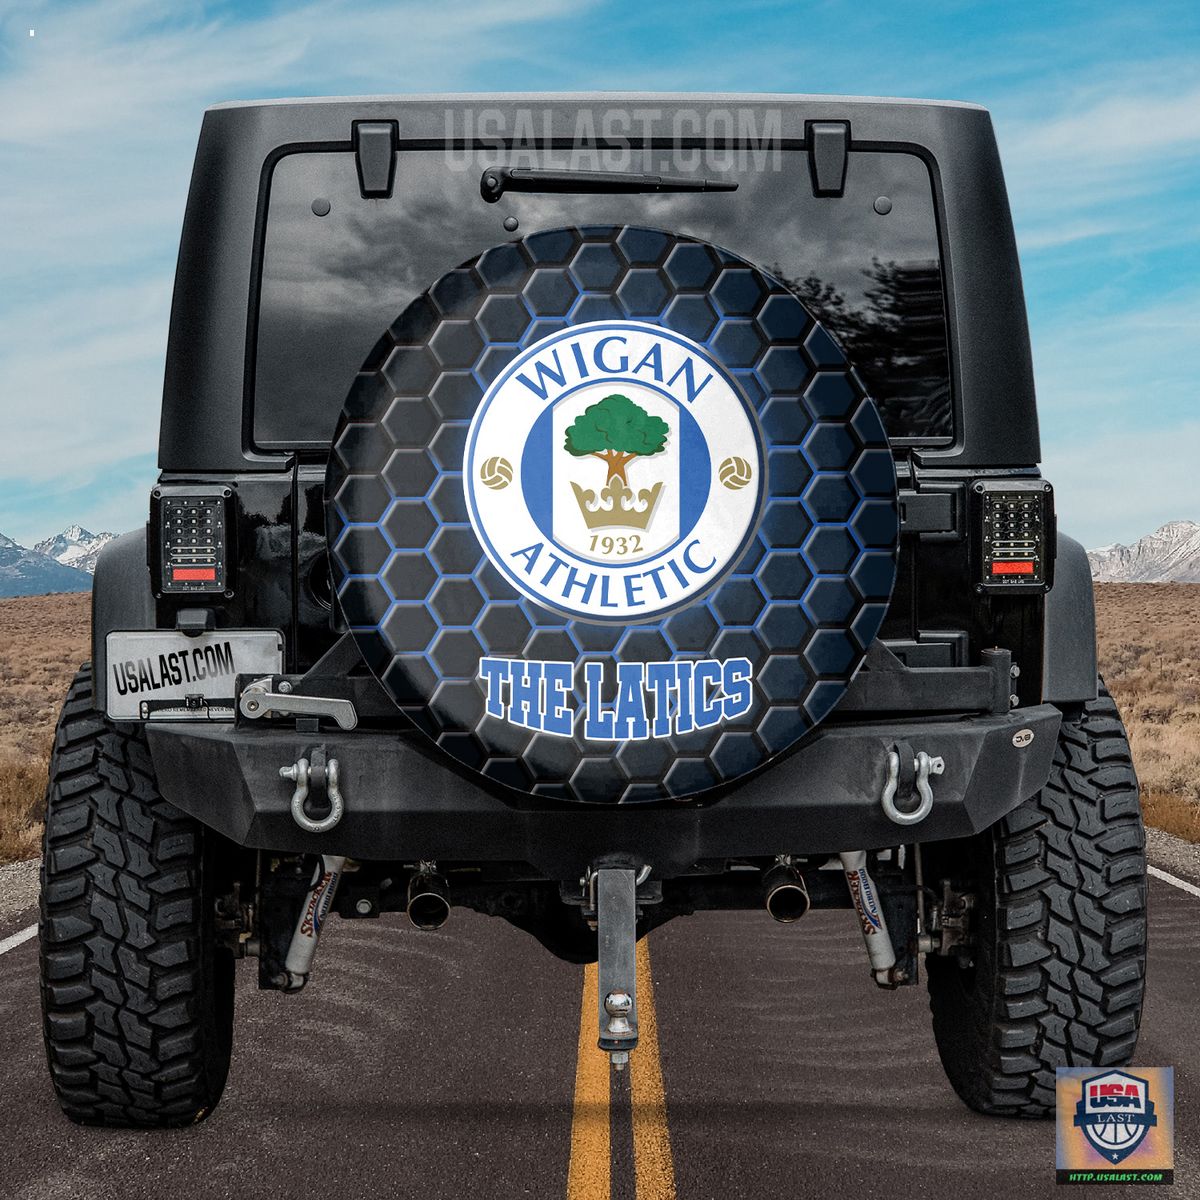 AMAZING Wigan Athletic FC Spare Tire Cover